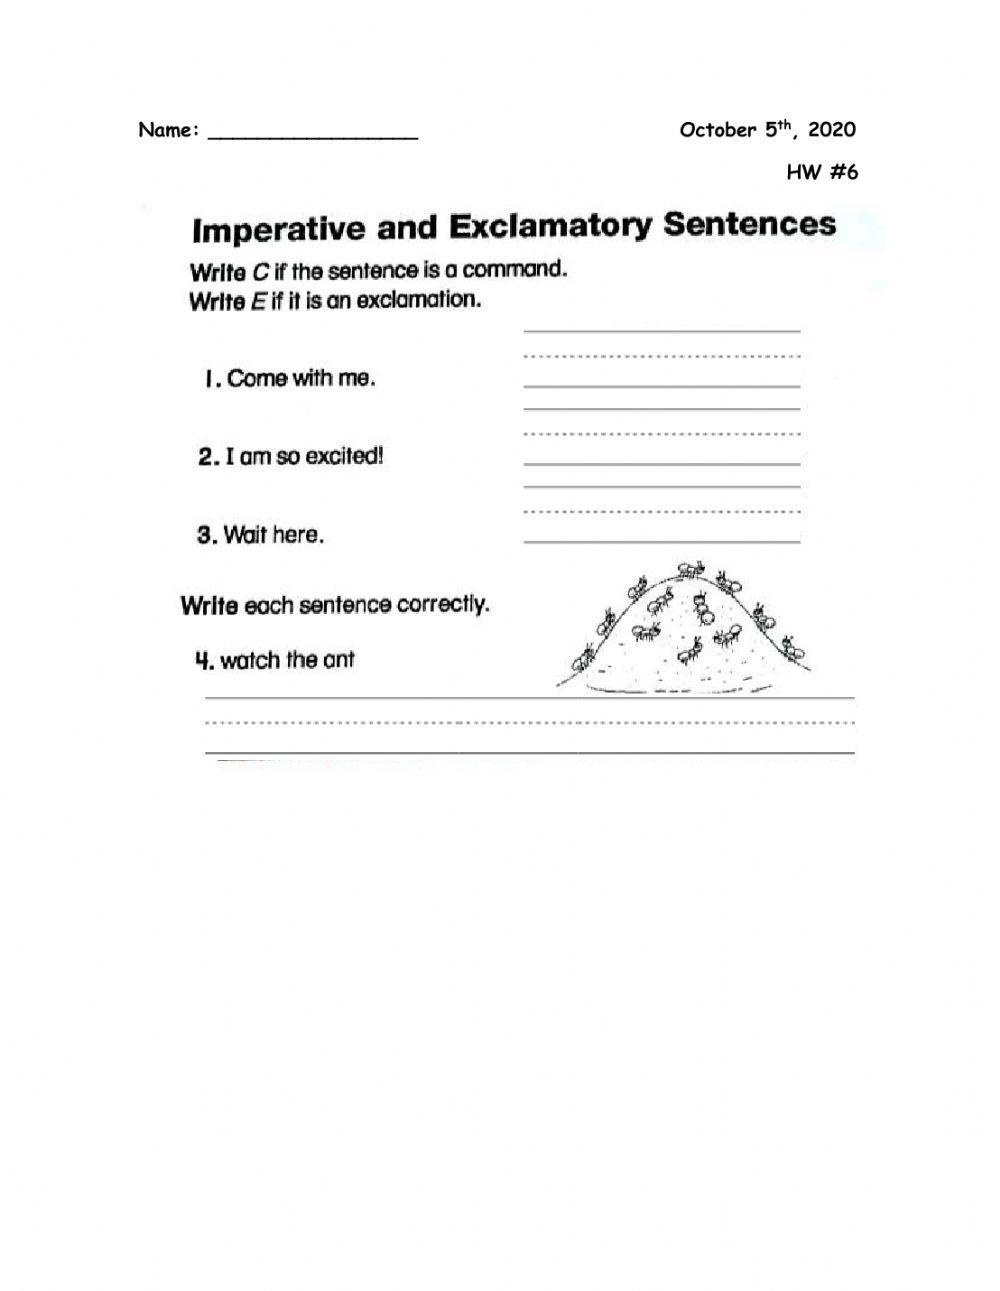 Imperative and Exclamatory Sentences